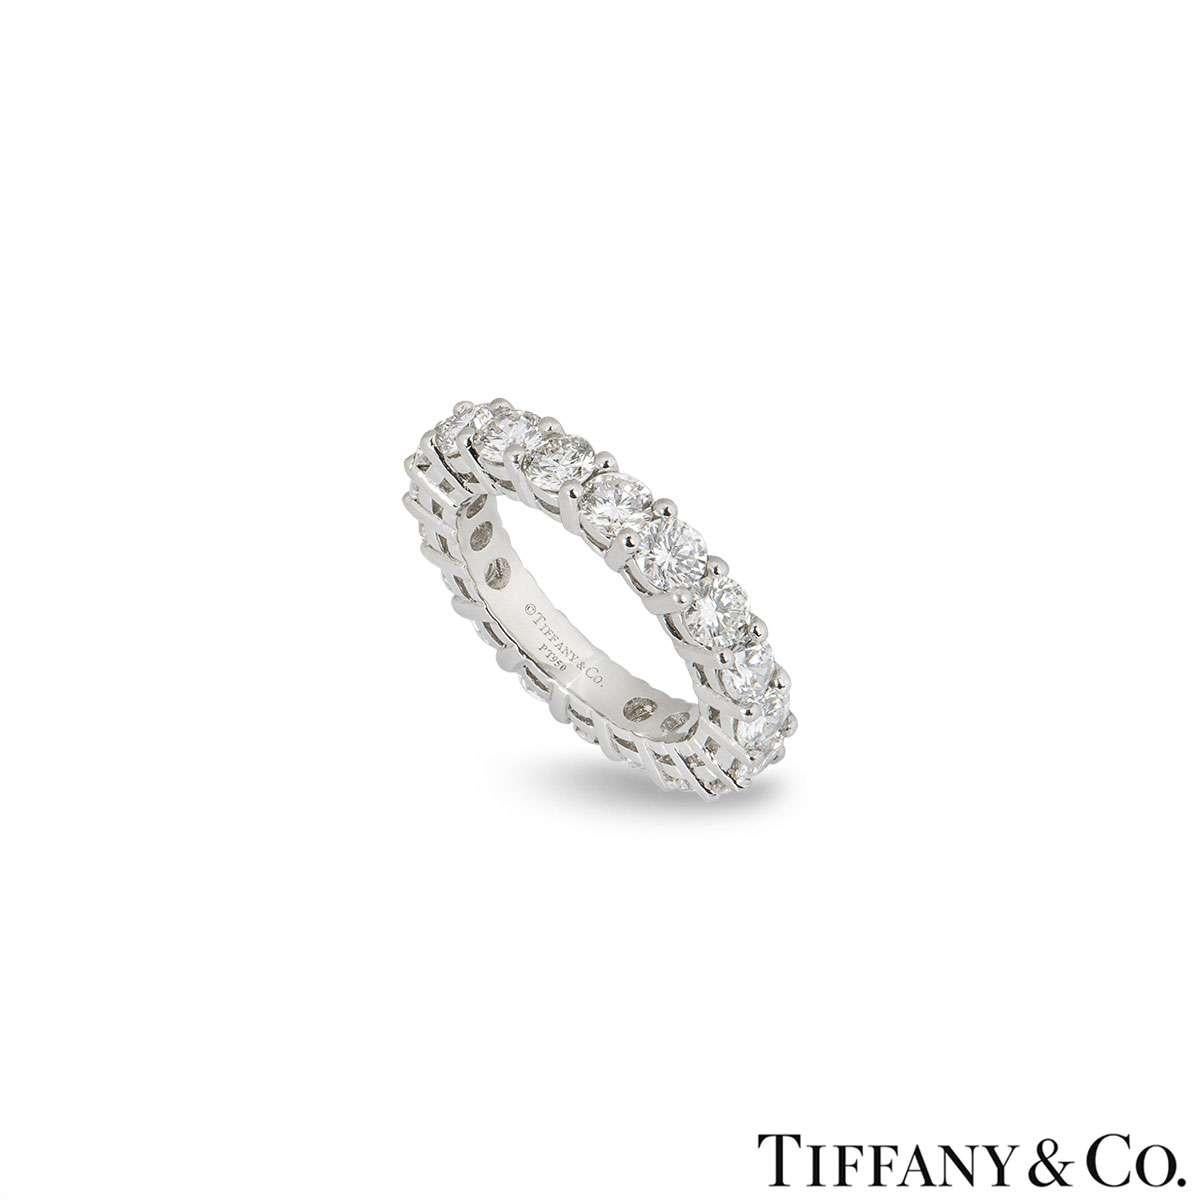 An elegant diamond eternity ring in platinum from the Embrace collection by Tiffany & Co. The ring is claw set with 19 round brilliant cut diamonds totalling approximately 2.85ct. The diamonds are predominantly G colour and VS clarity. The 3.7mm